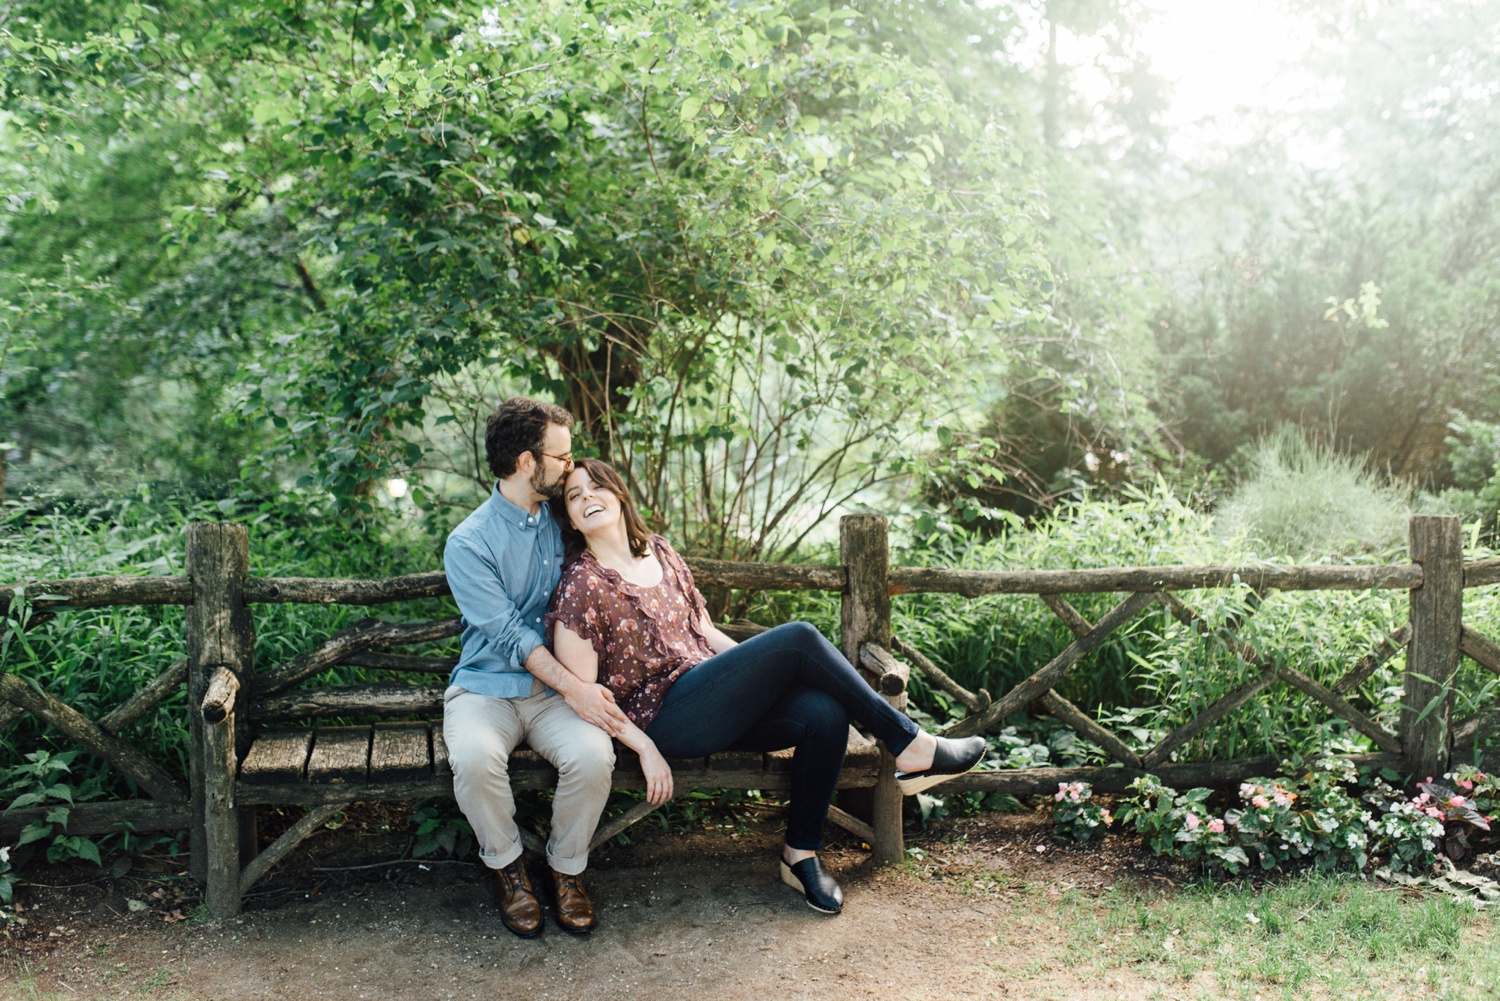 Mollie + Andrew - Central Park Engagement Session - Alison Dunn Photography photo